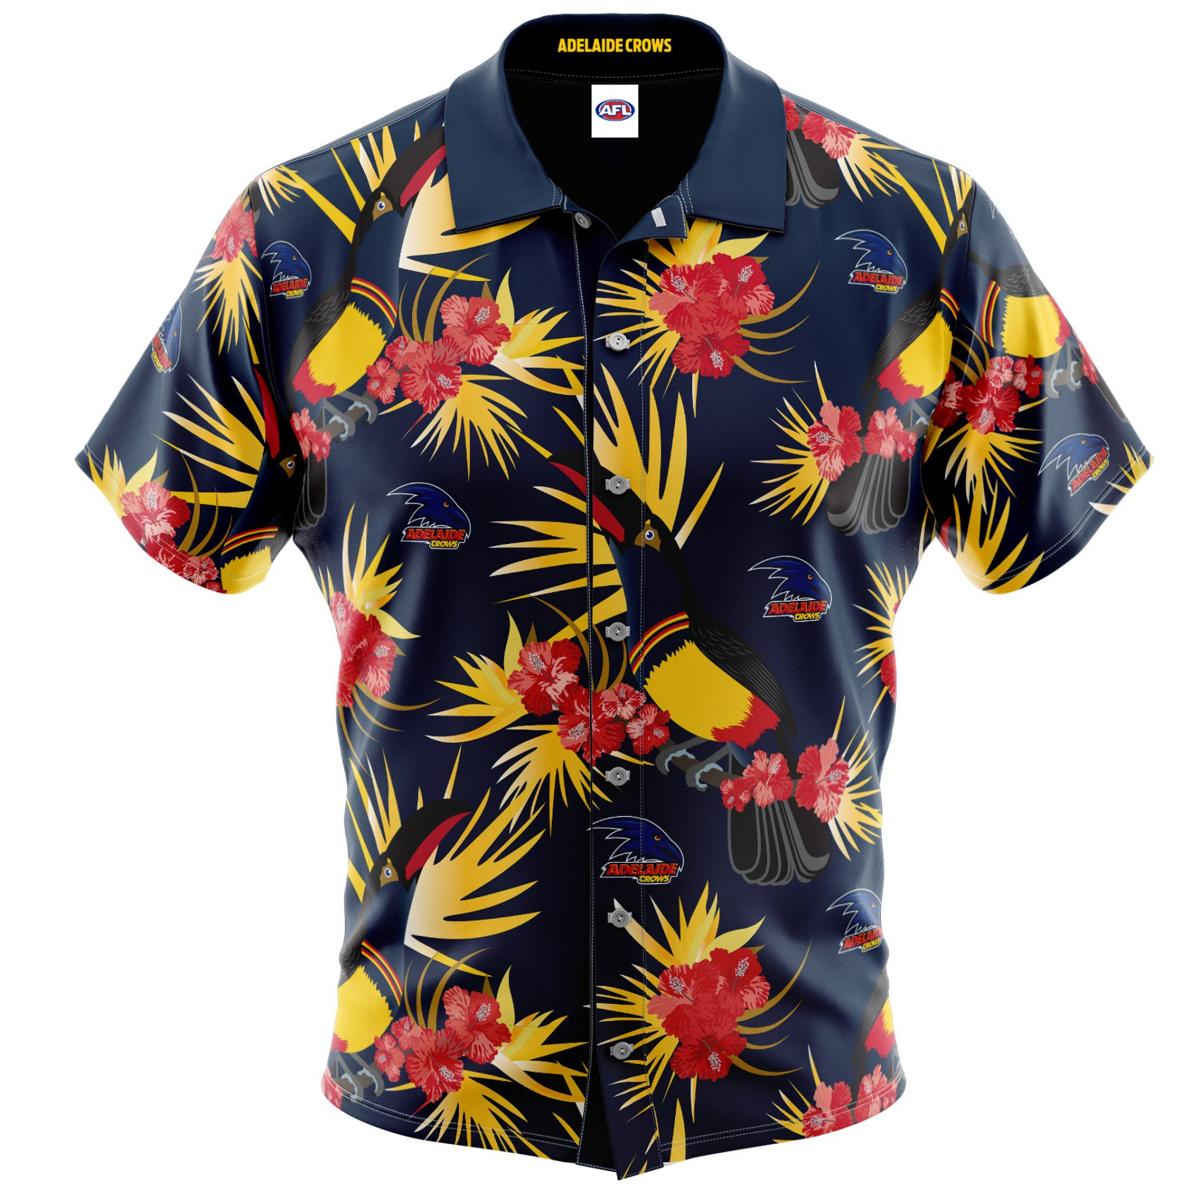 Adelaide Crows Football Team Since 1990 Vintage Hawaiian Shirt For Afl Fans